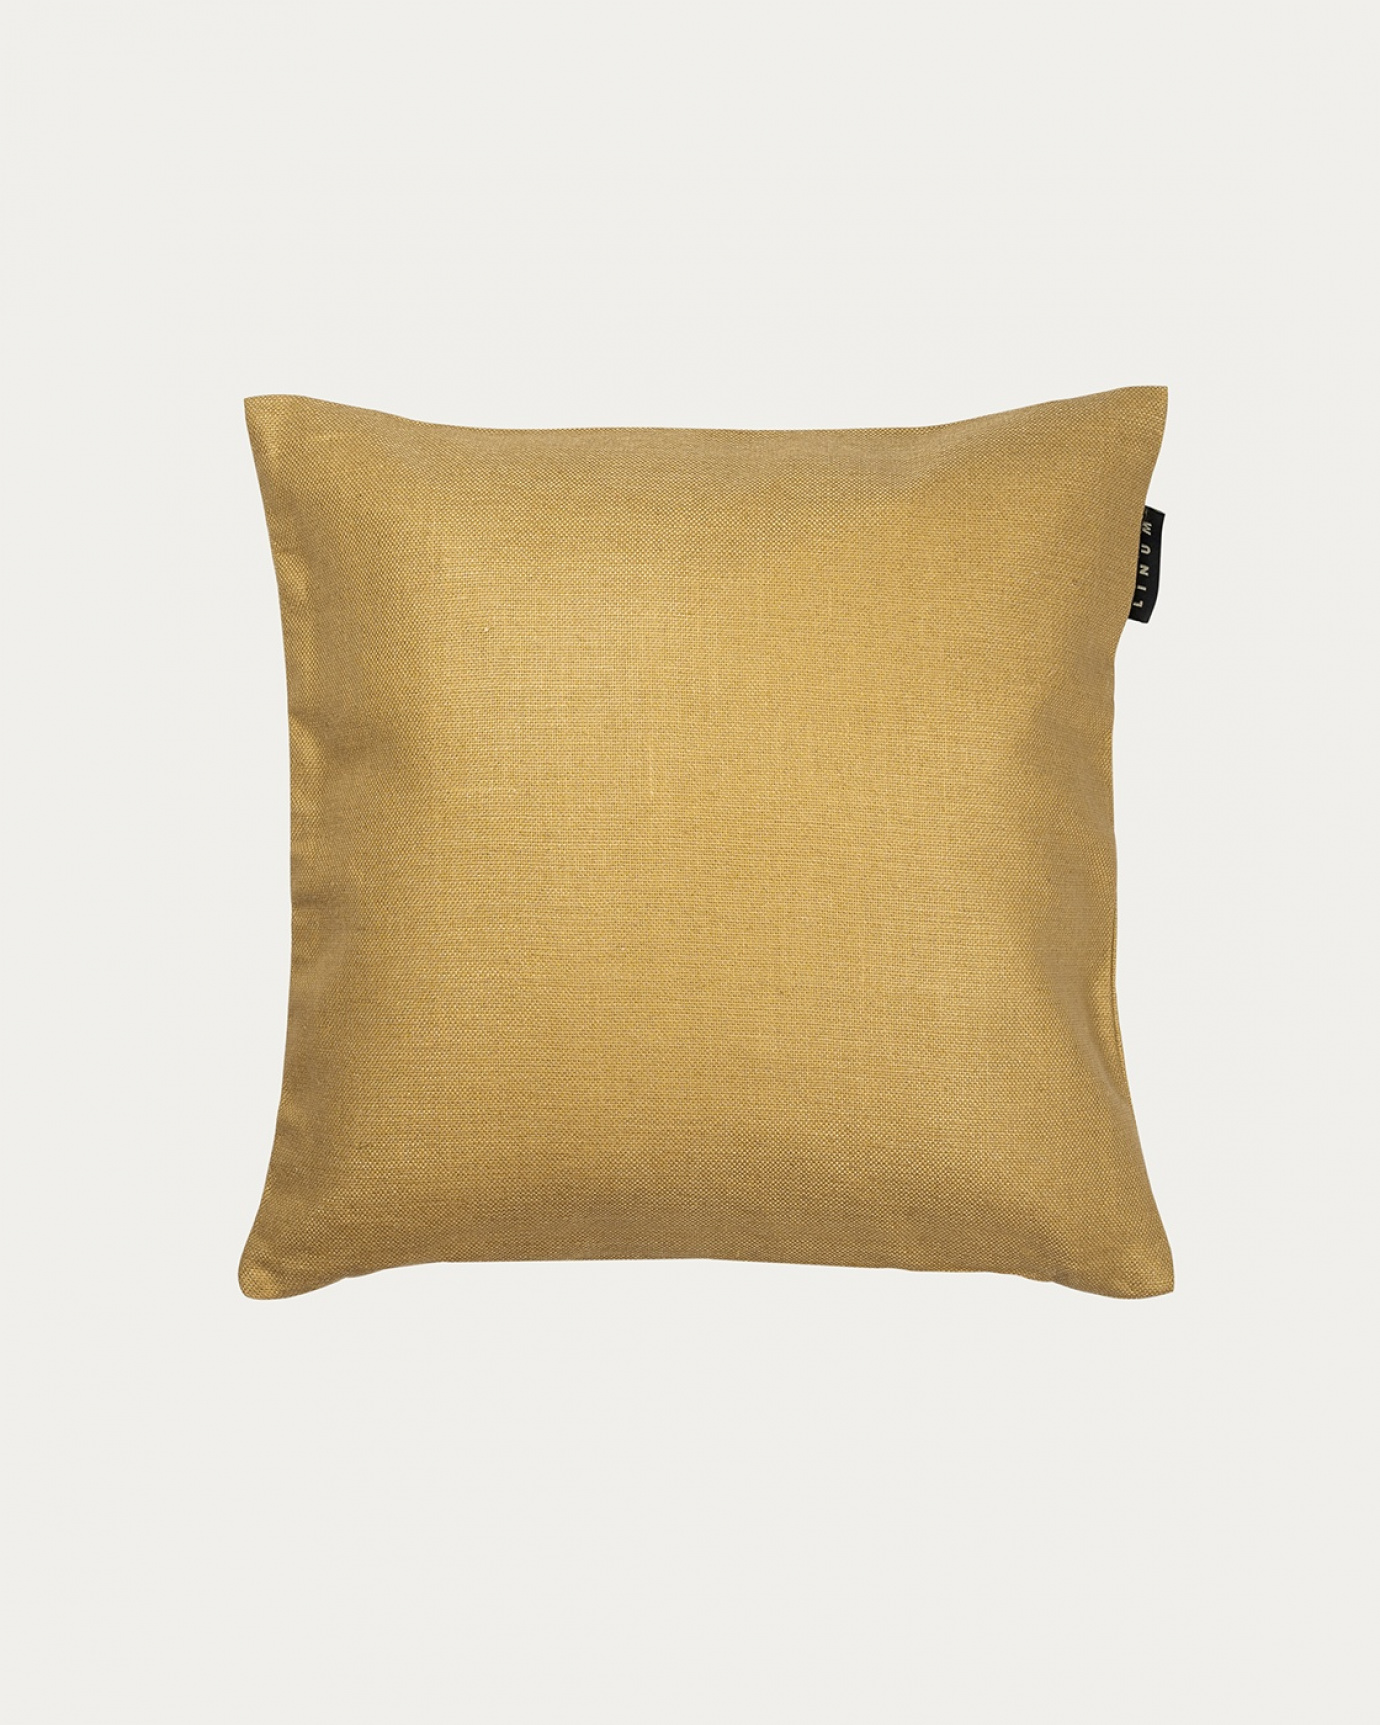 Product image straw yellow SETA cushion cover made of 100% raw silk that gives a nice lustre from LINUM DESIGN. Size 40x40 cm.